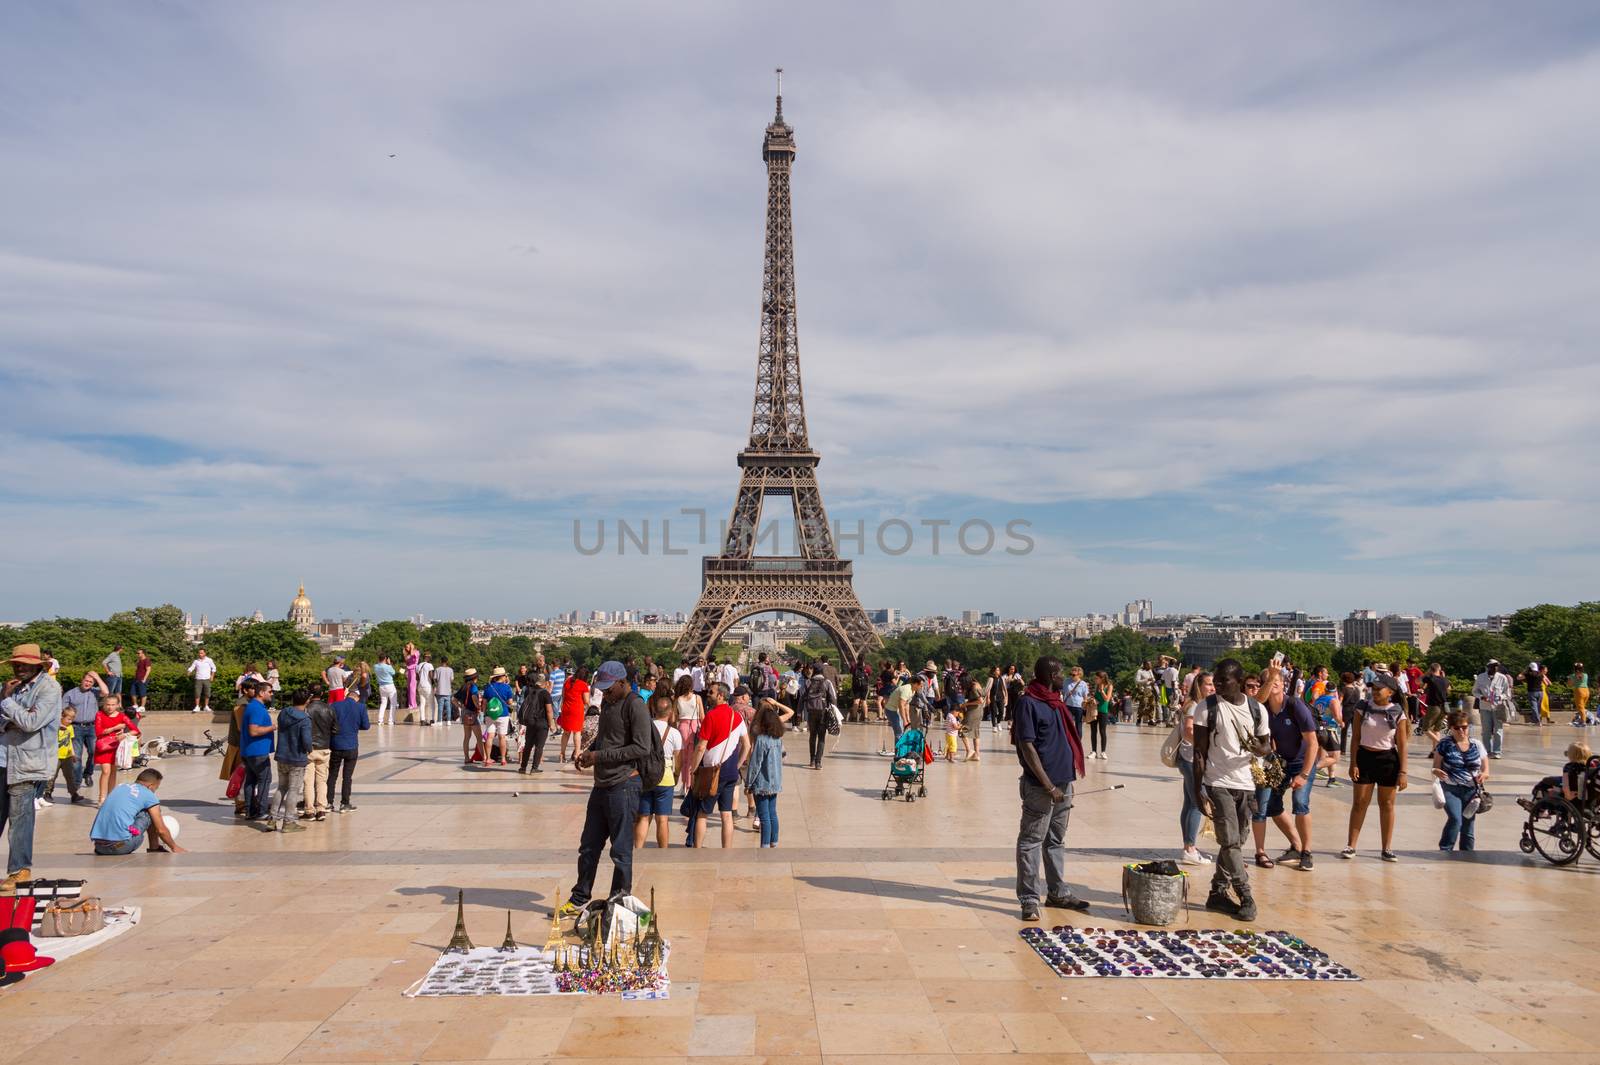 Paris, France - 23 June 2018: Eiffel Tower from Trocadero with many tourists in the foreground